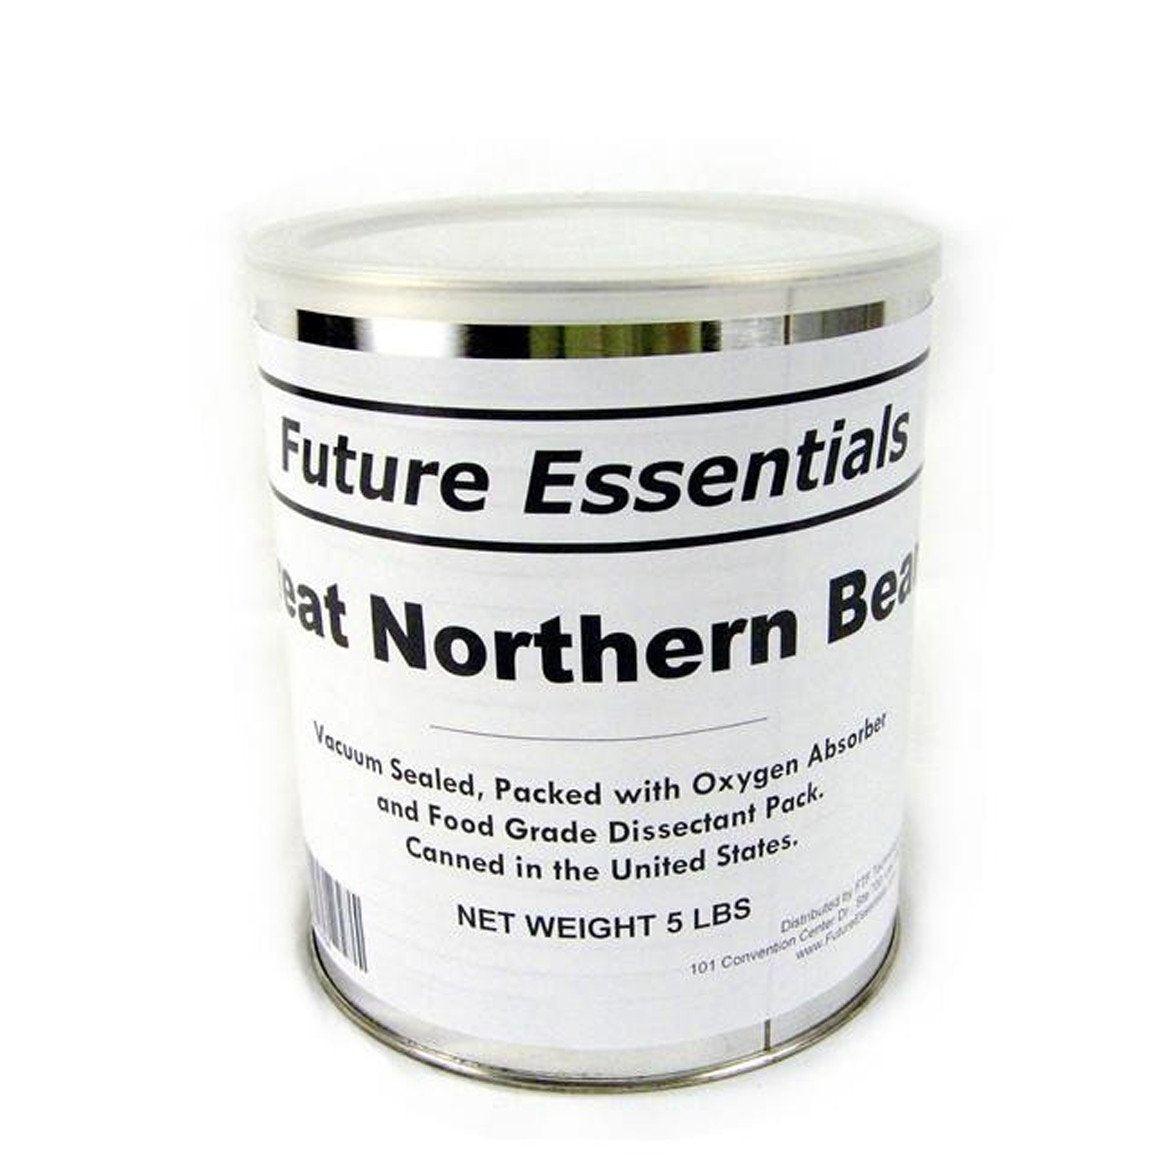 Future Essentials Great Northern Beans are free of preservatives and artificial ingredients. They are also vegan and gluten-free. Each can contains 5 pounds of freeze-dried great northern beans